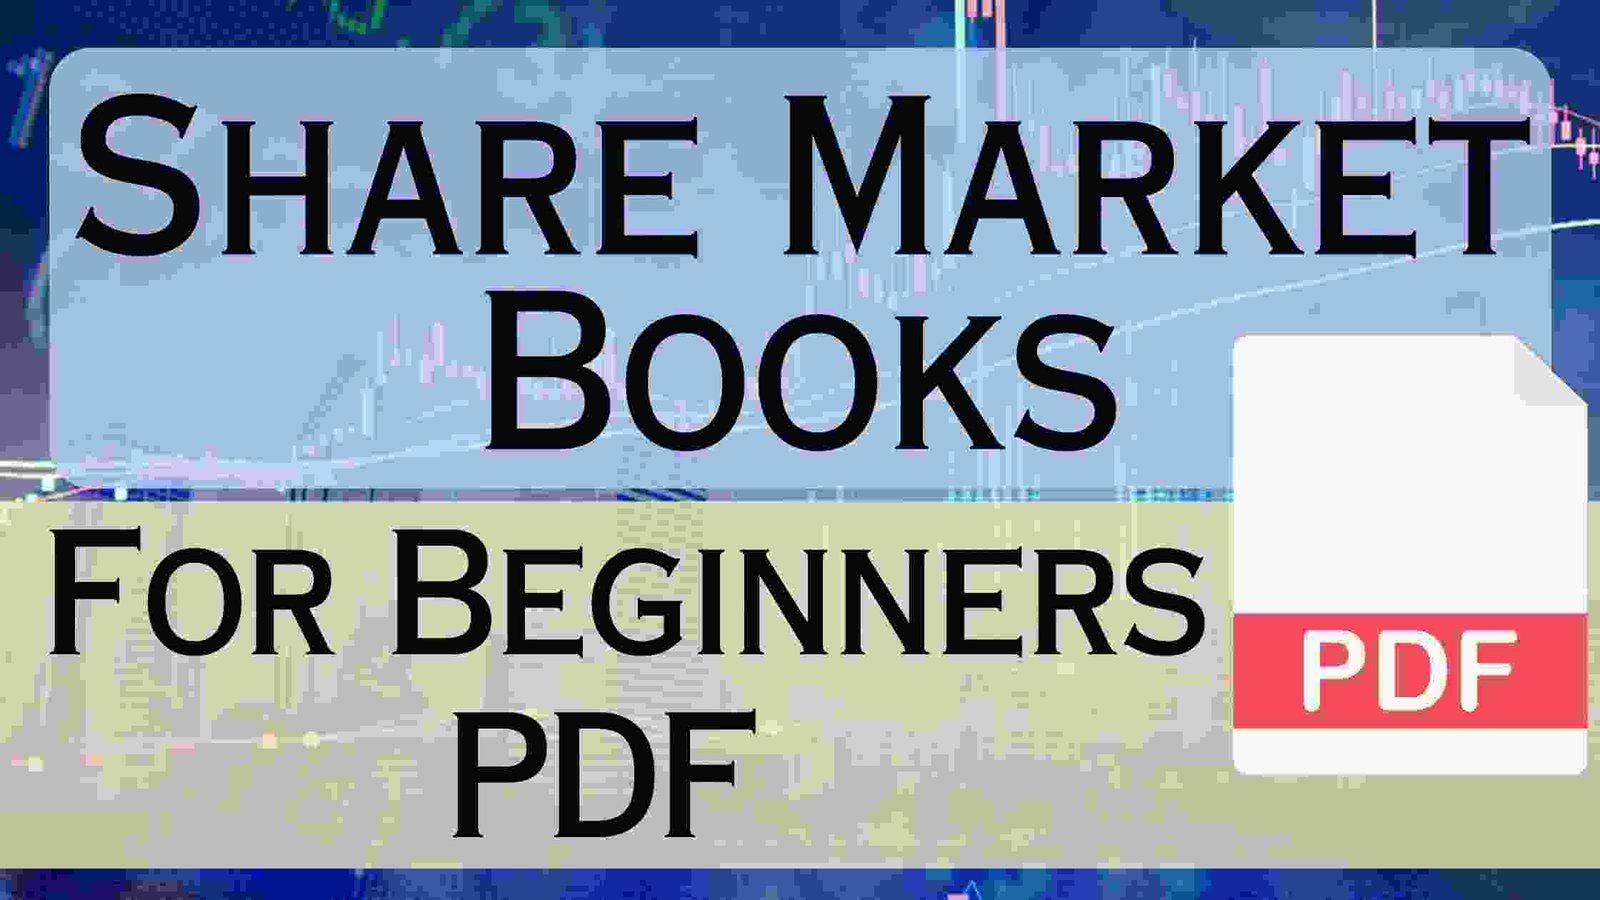 Share Market Books For Beginners PDF | Stock Market Book In Hindi PDF Free Download